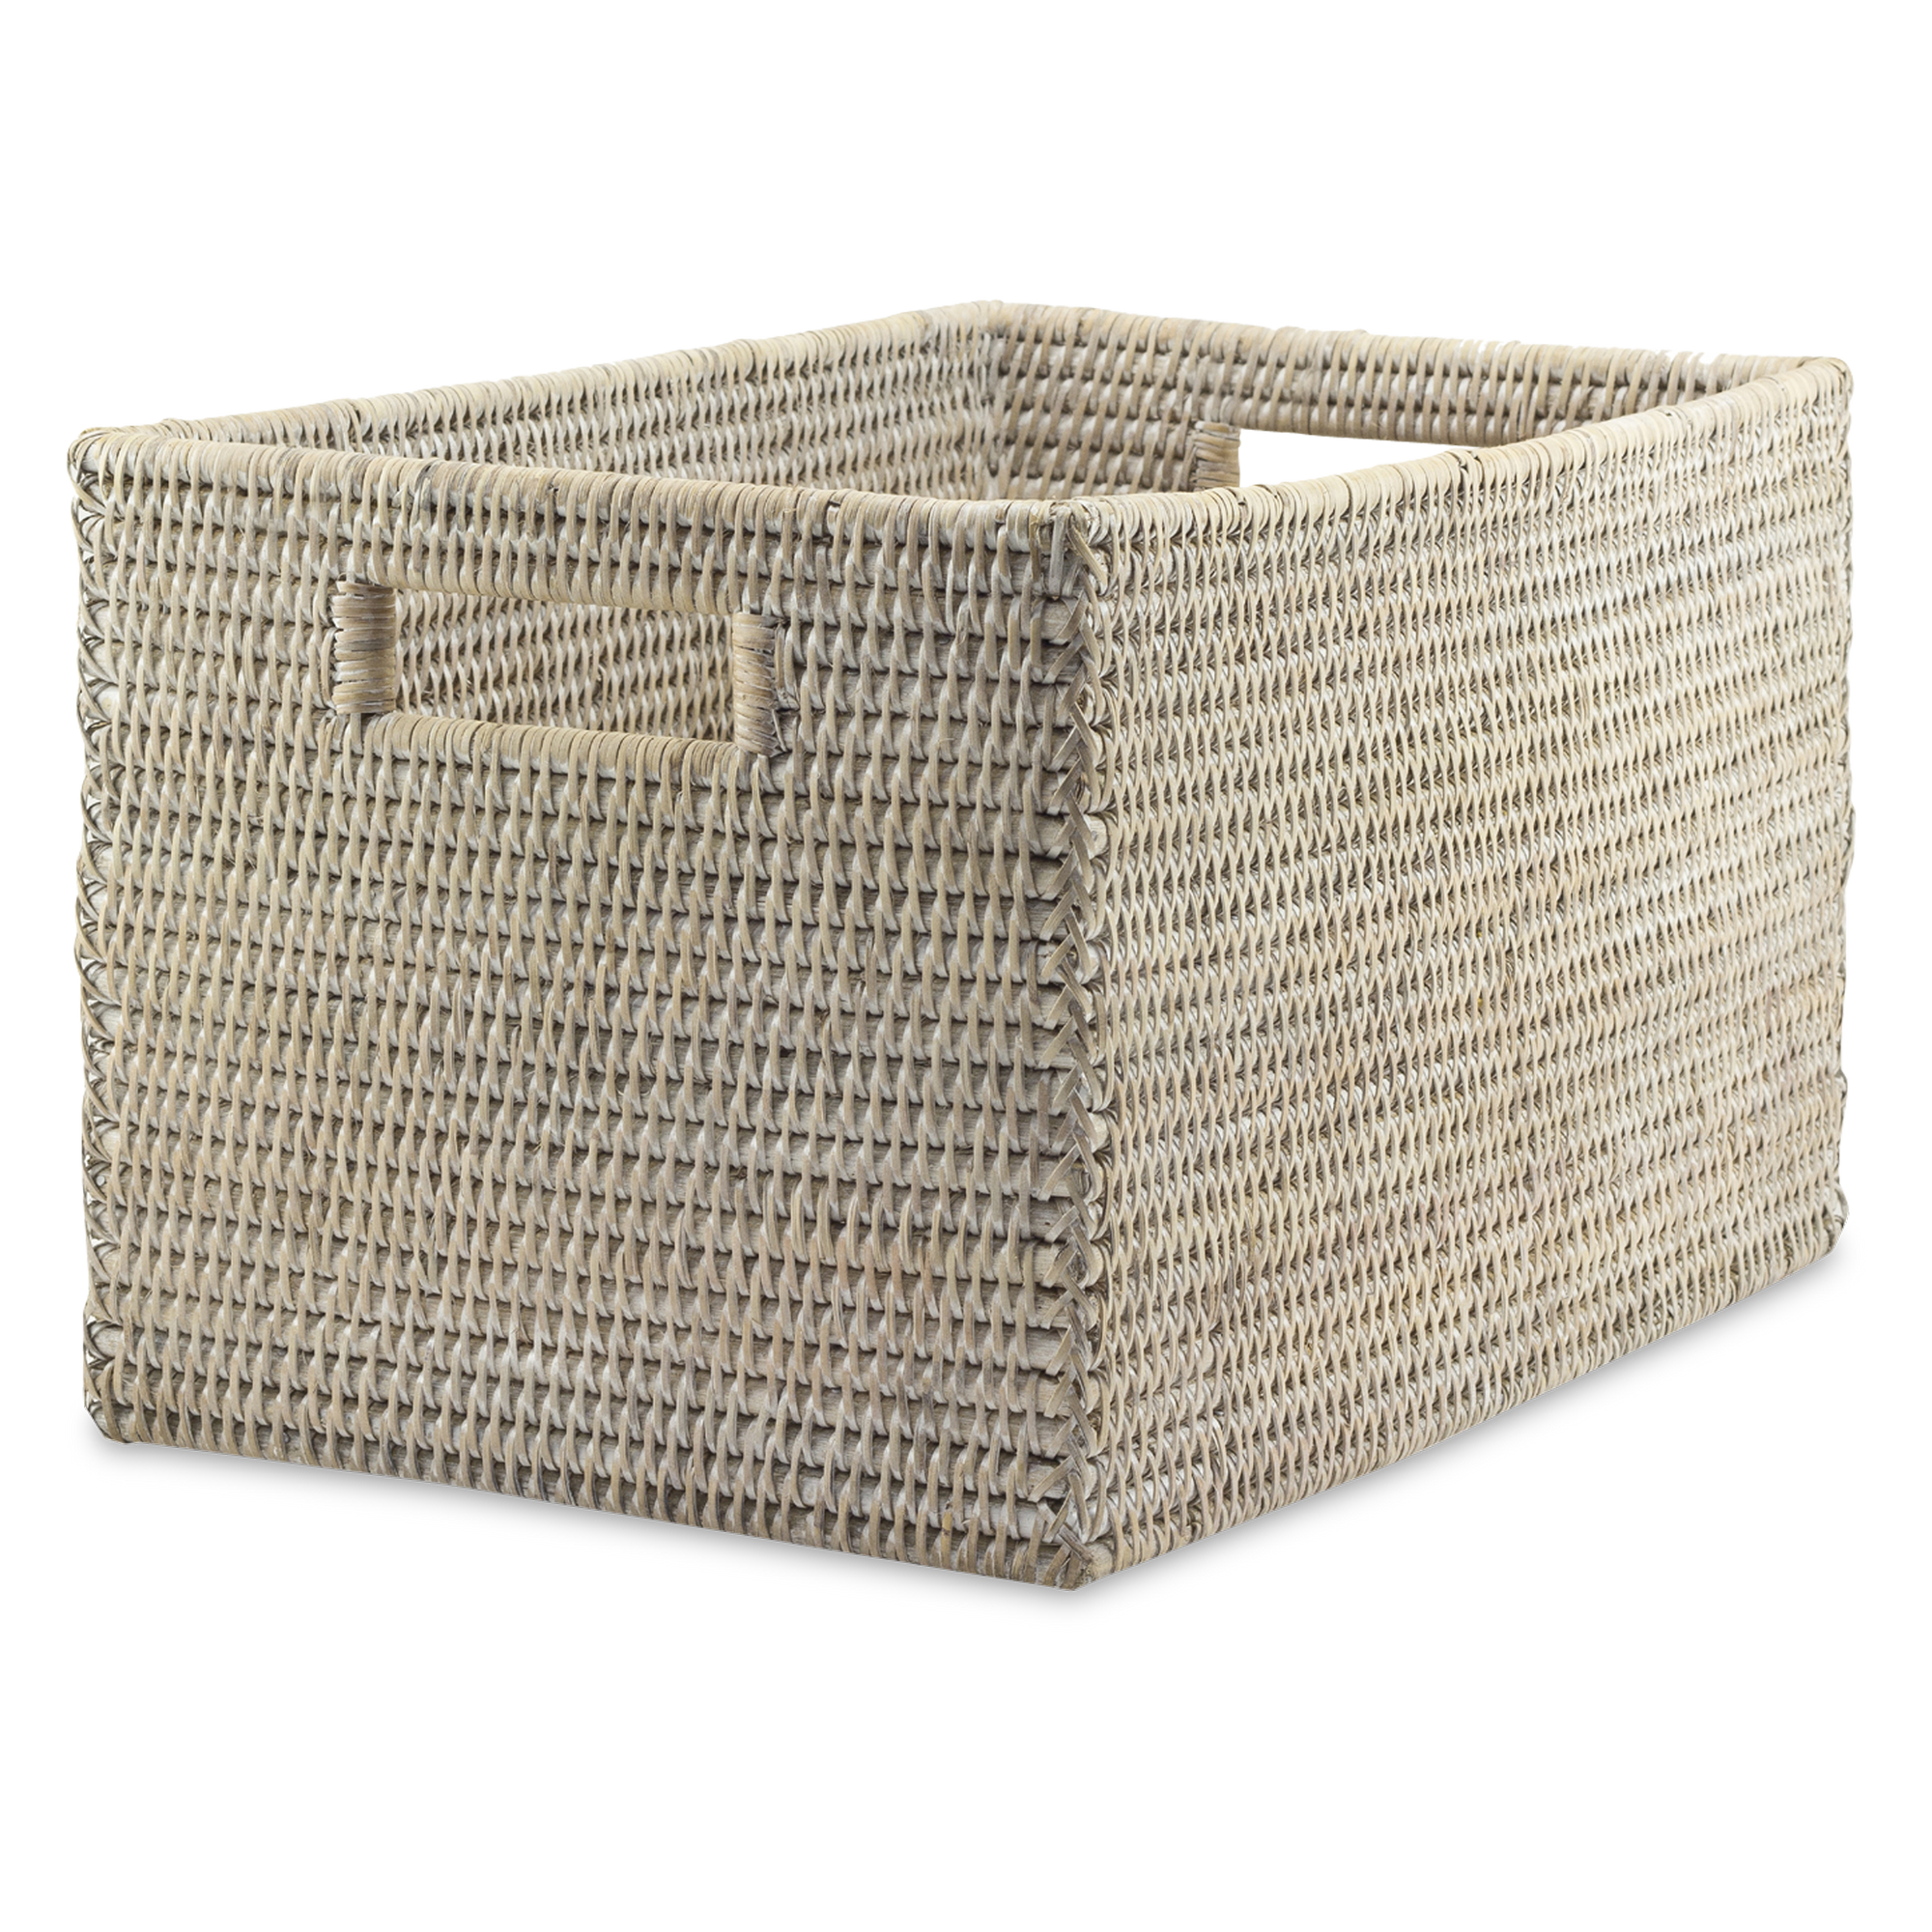 The Tamiko collection of rattan accessories is made in Myanmar under fair trade conditions.